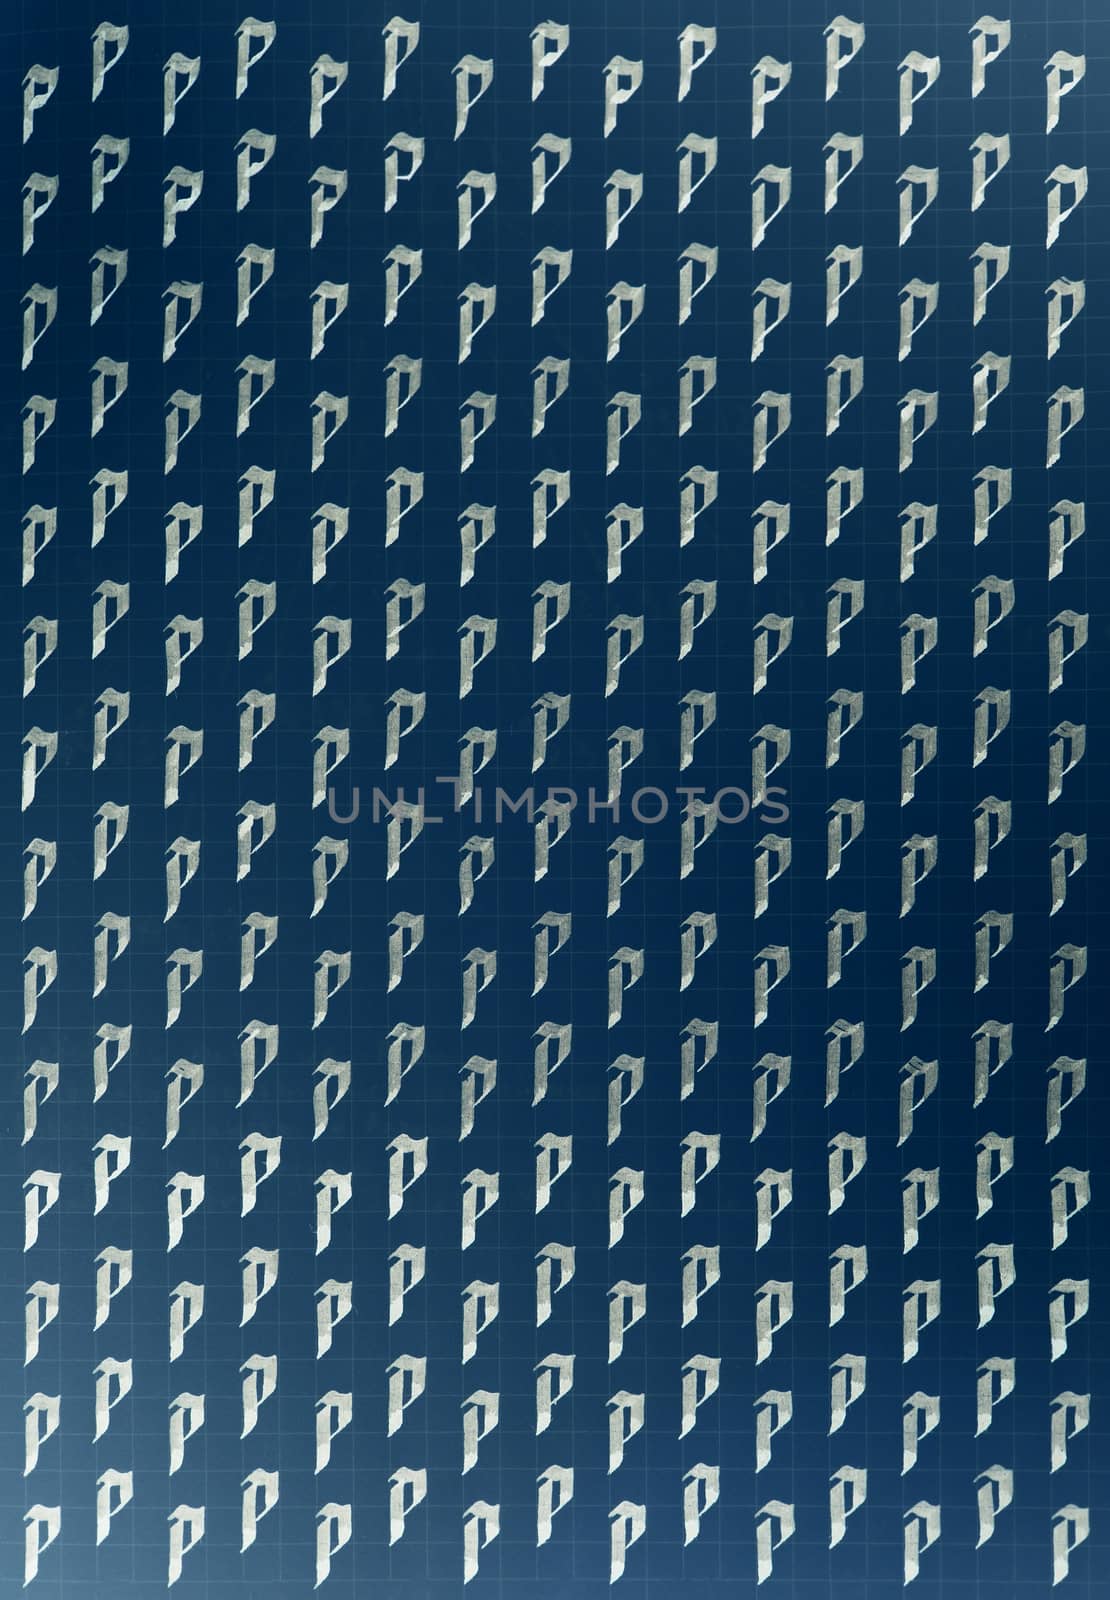 Calligraphic white on dark blue letter P learning skills paper page. Calligraphy letters p background. Lettering practice writing worksheet. Handwriting symbol filling pattern.